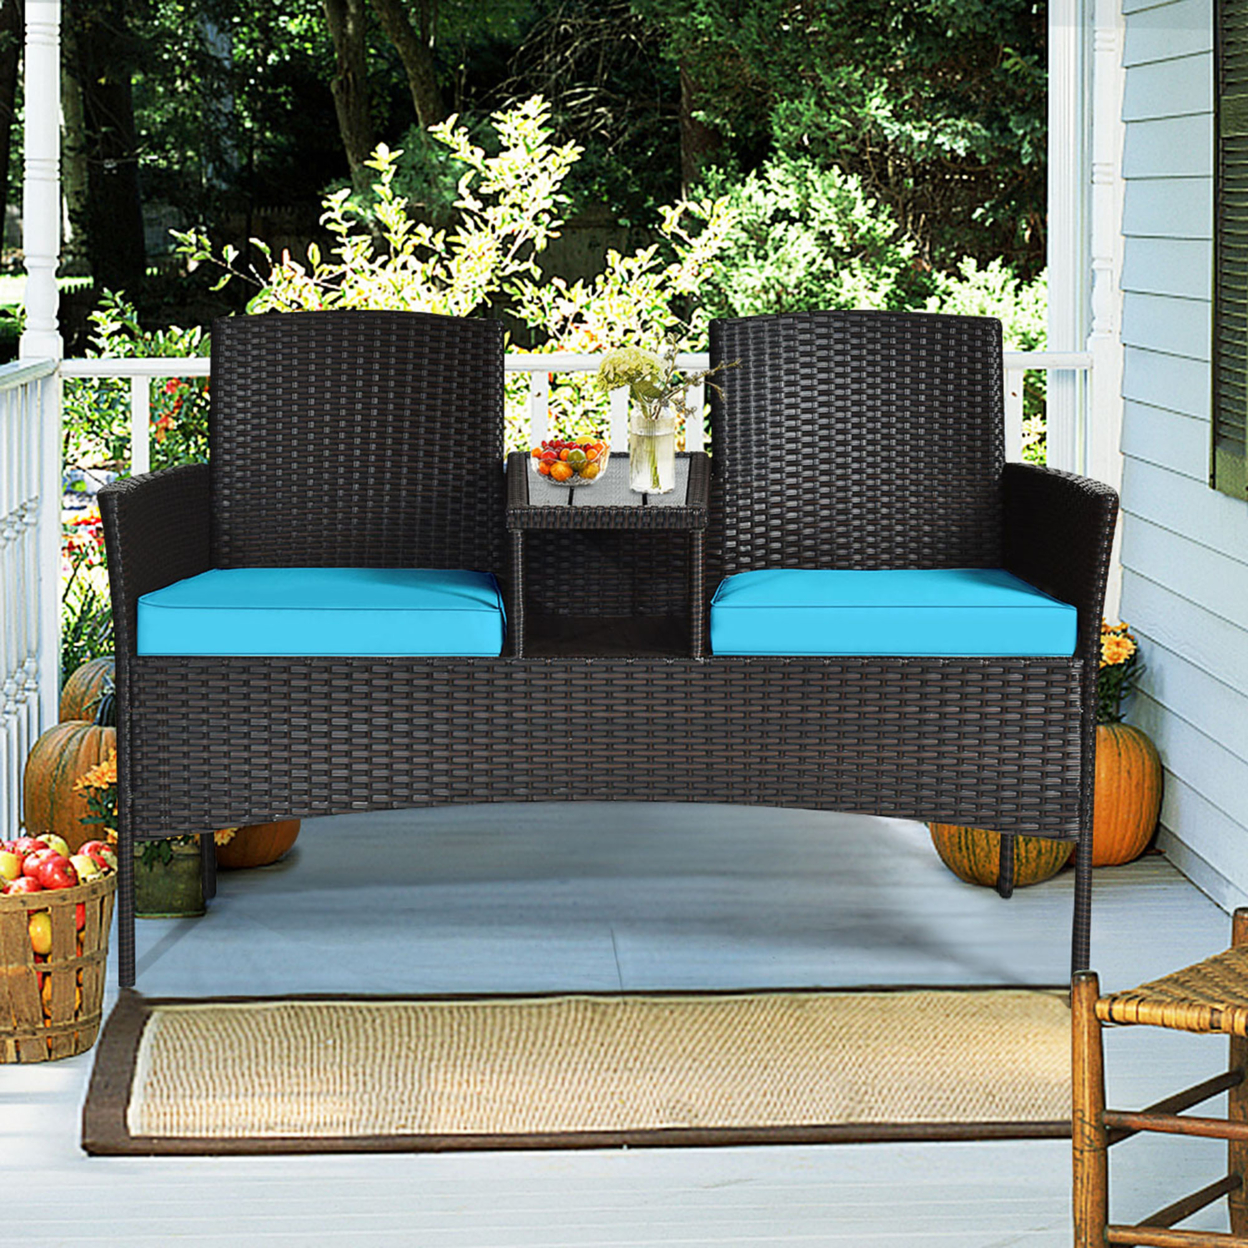 Gymax Rattan Wicker Patio Conversation Set W/ Loveseat Table Turquoise Cushion